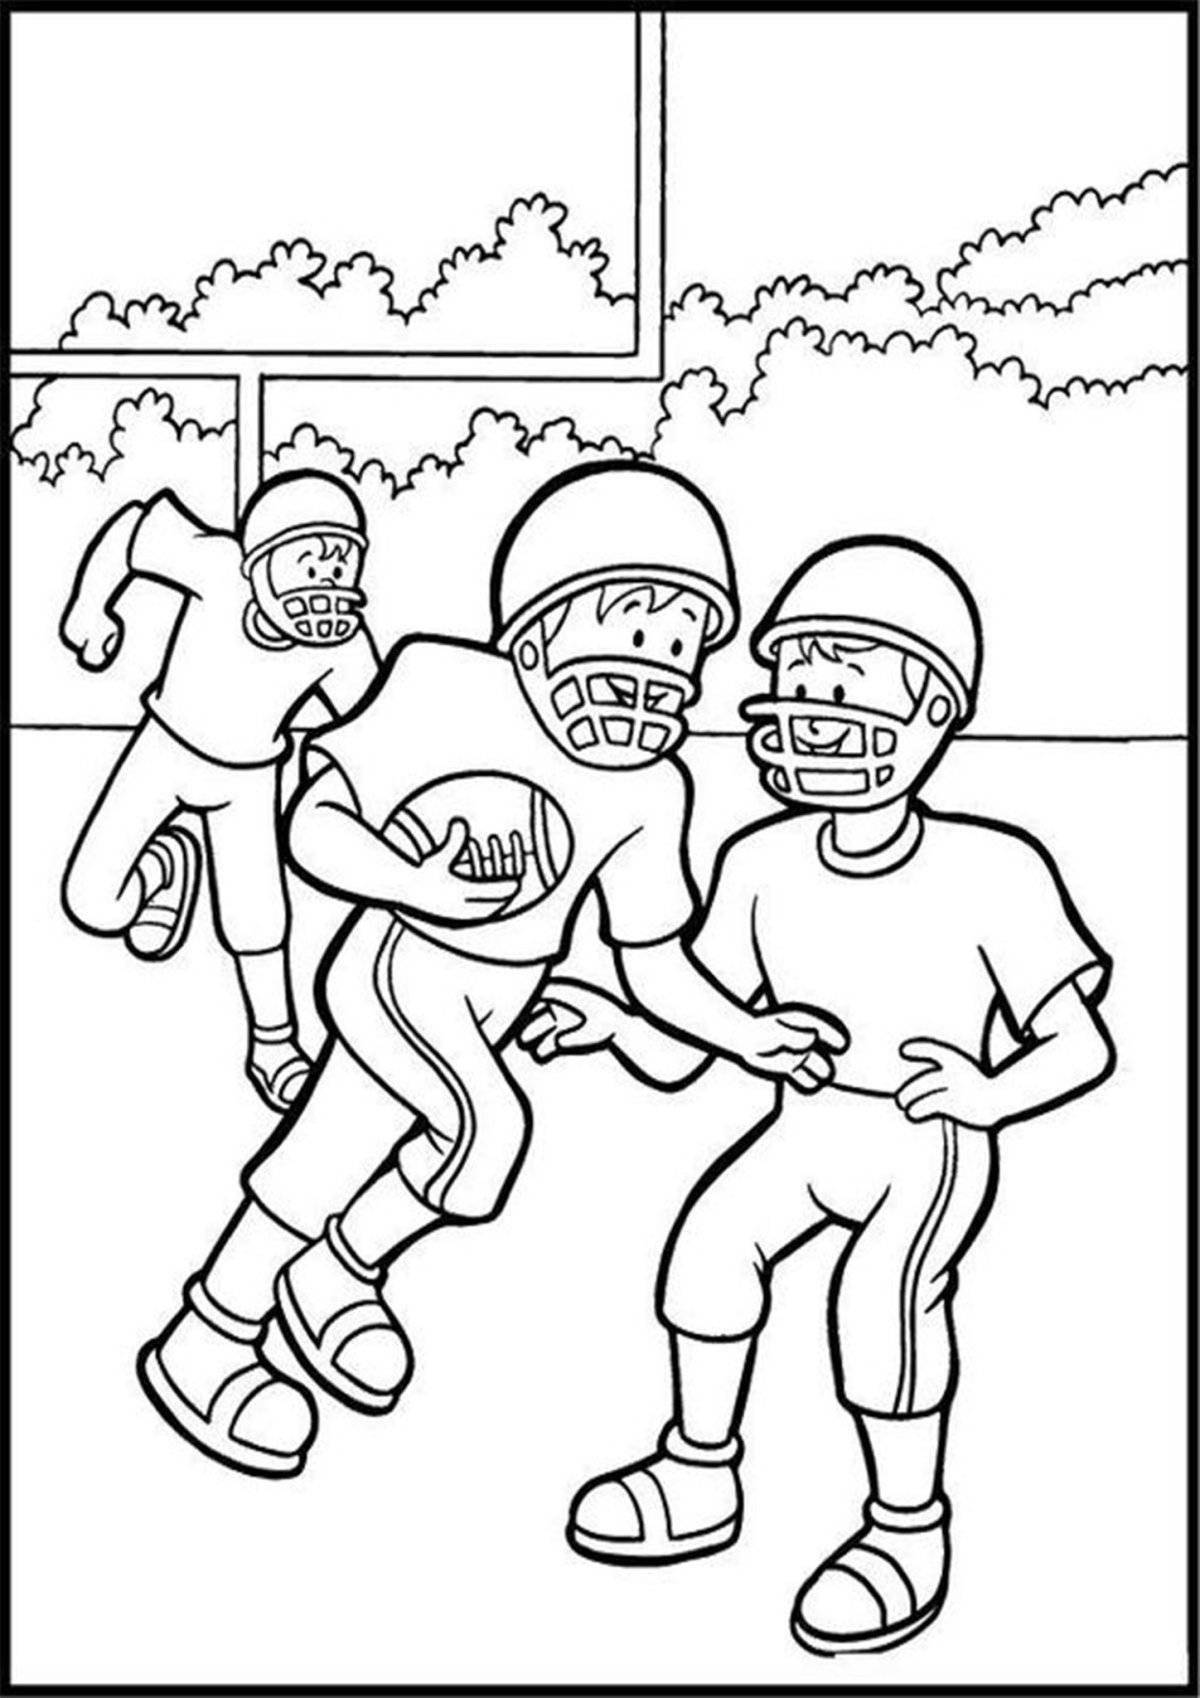 Entertainment sports games coloring book